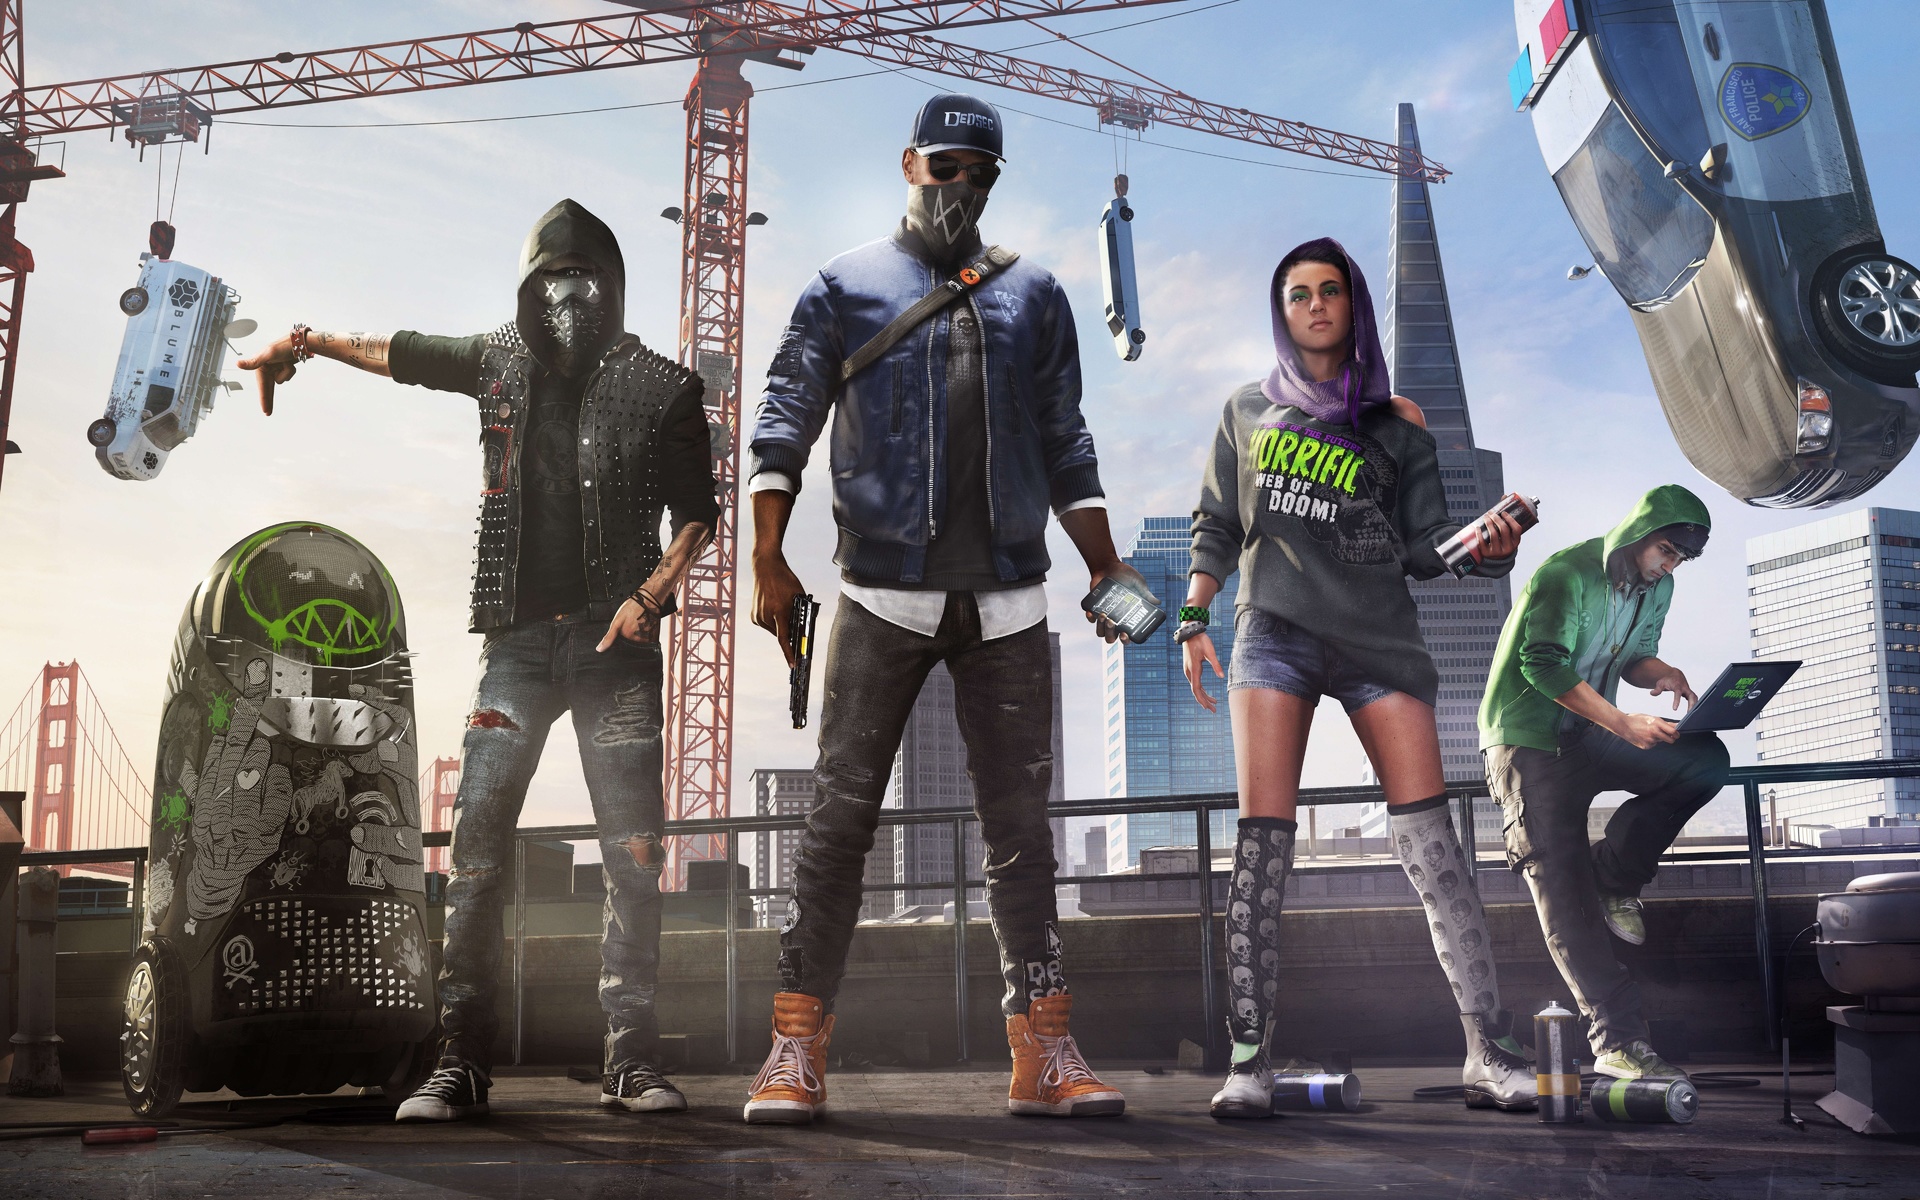 watch dogs 2, action-adventure game, ubisoft montreal